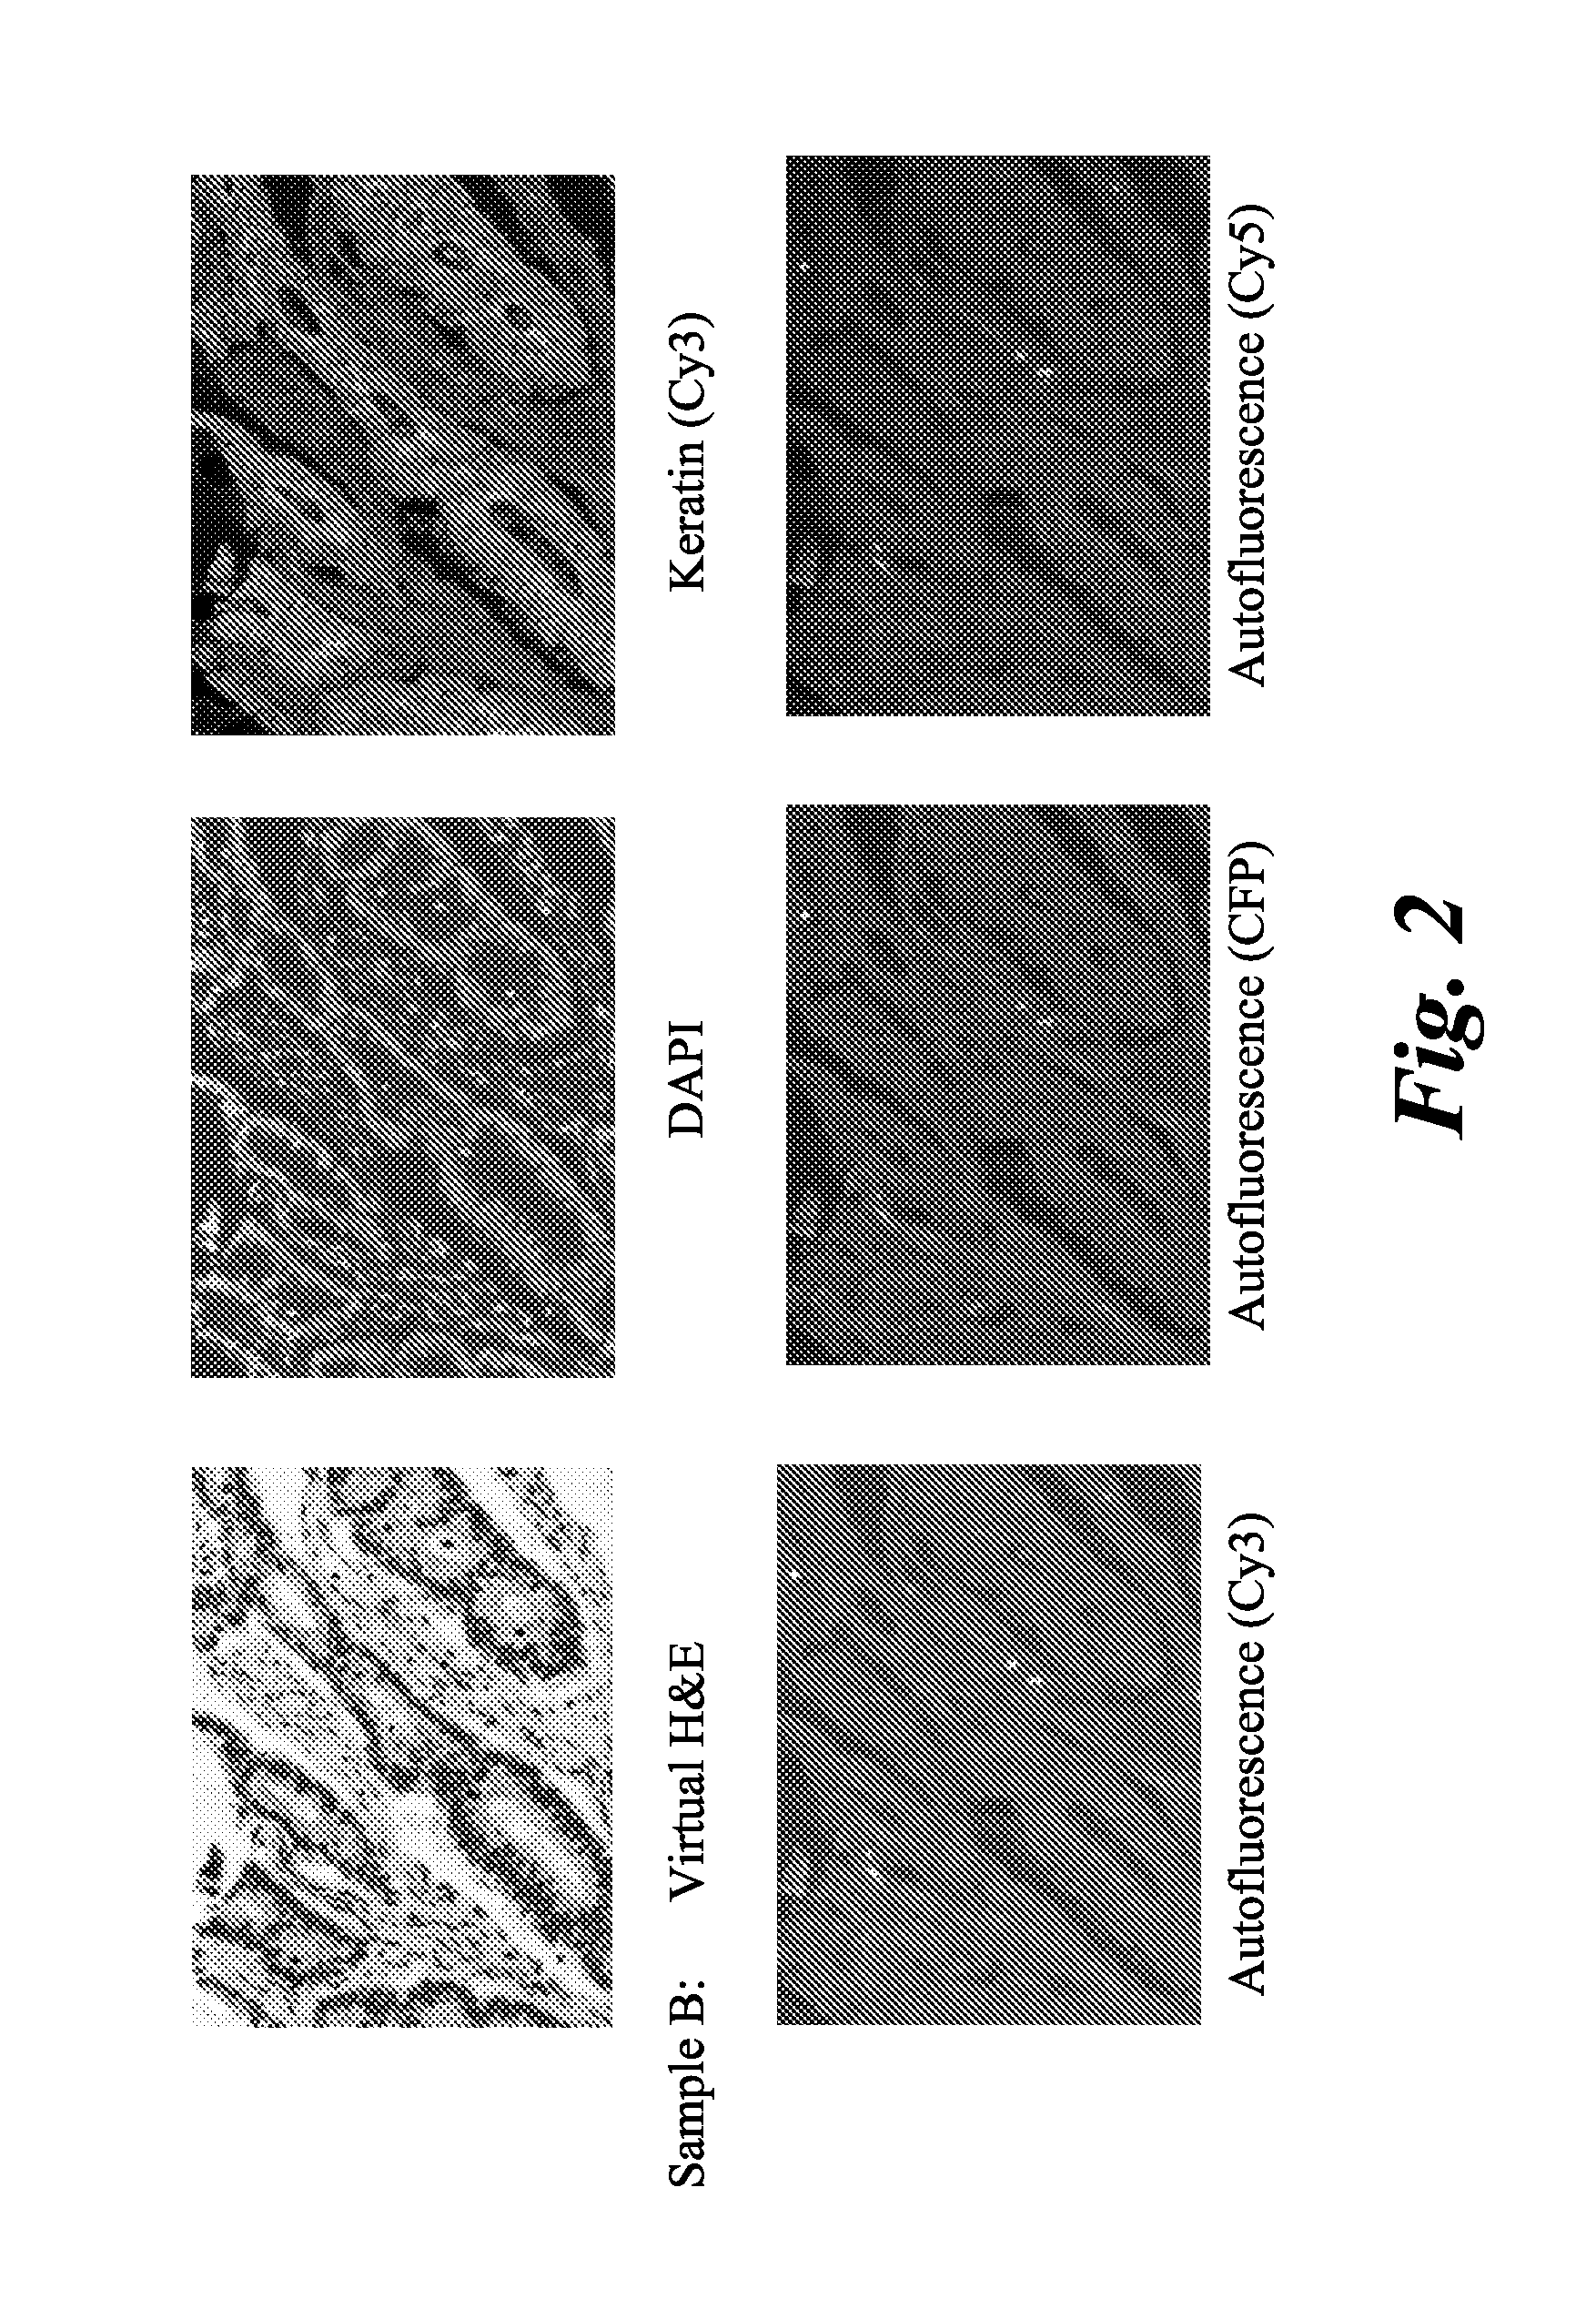 System and methods for generating a brightfield image using fluorescent images